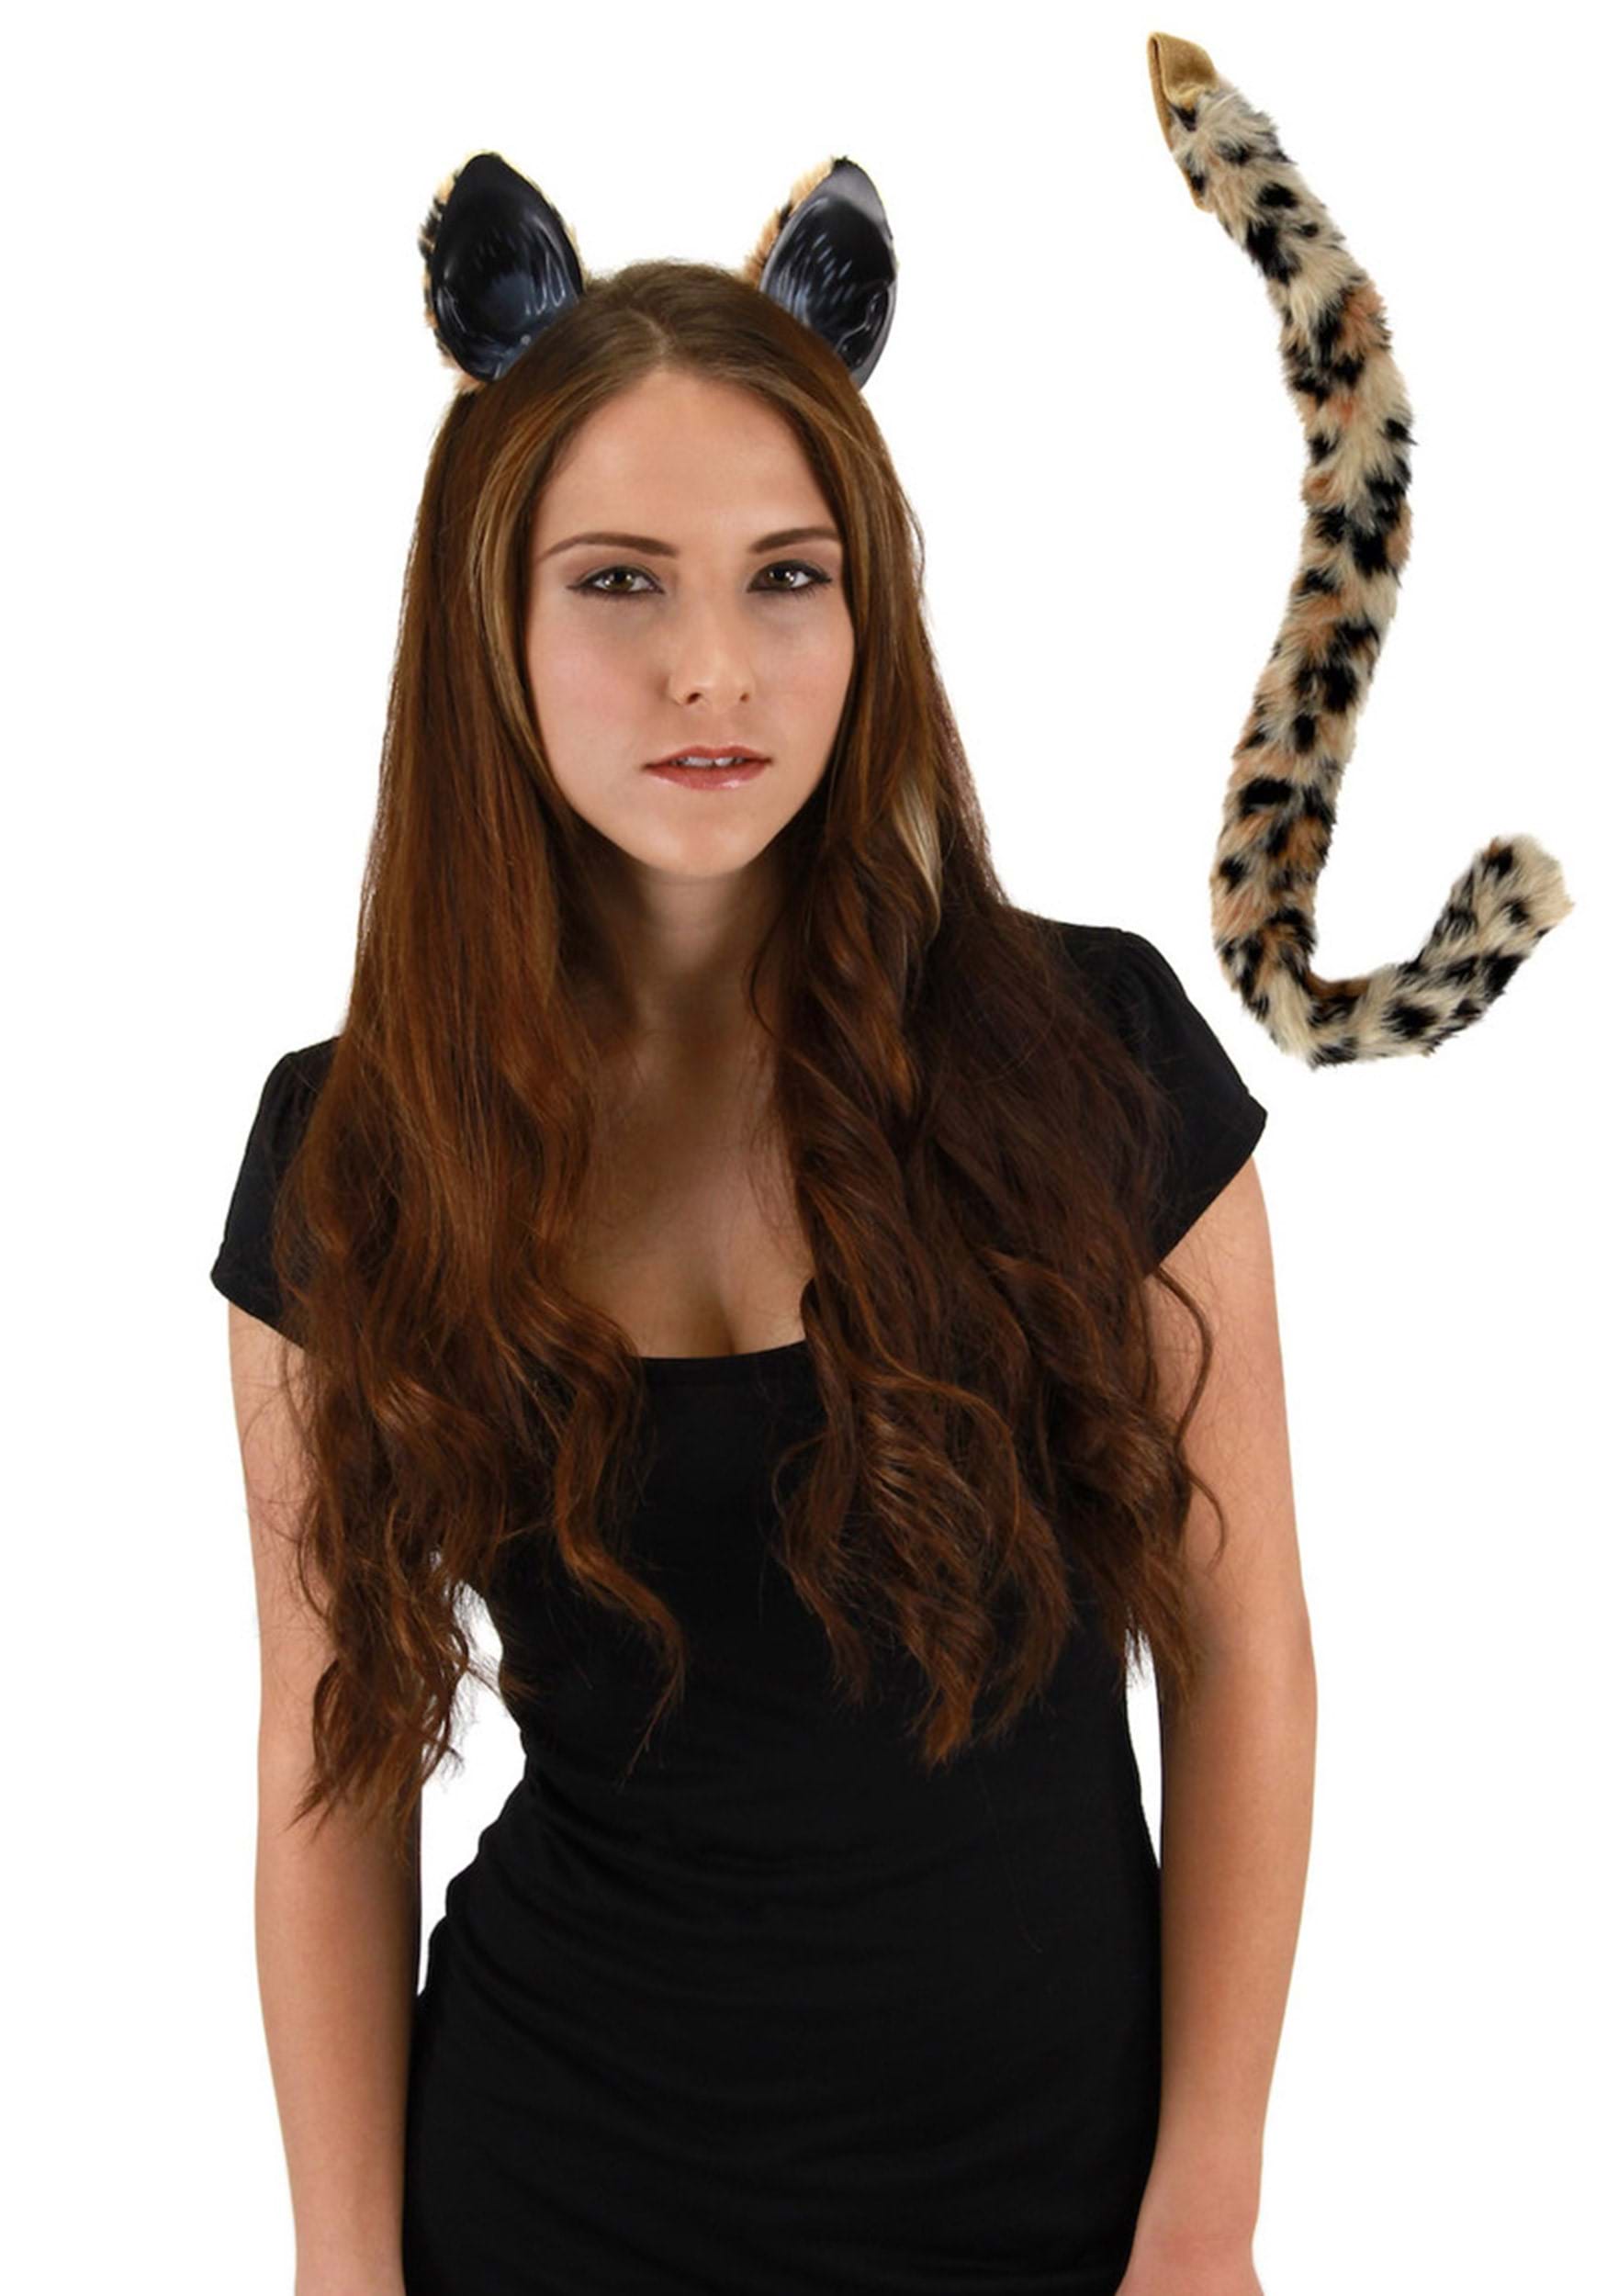 Cheetah Ears And Tail Fancy Dress Costume Kit , Wild Cat Fancy Dress Costume Accessories